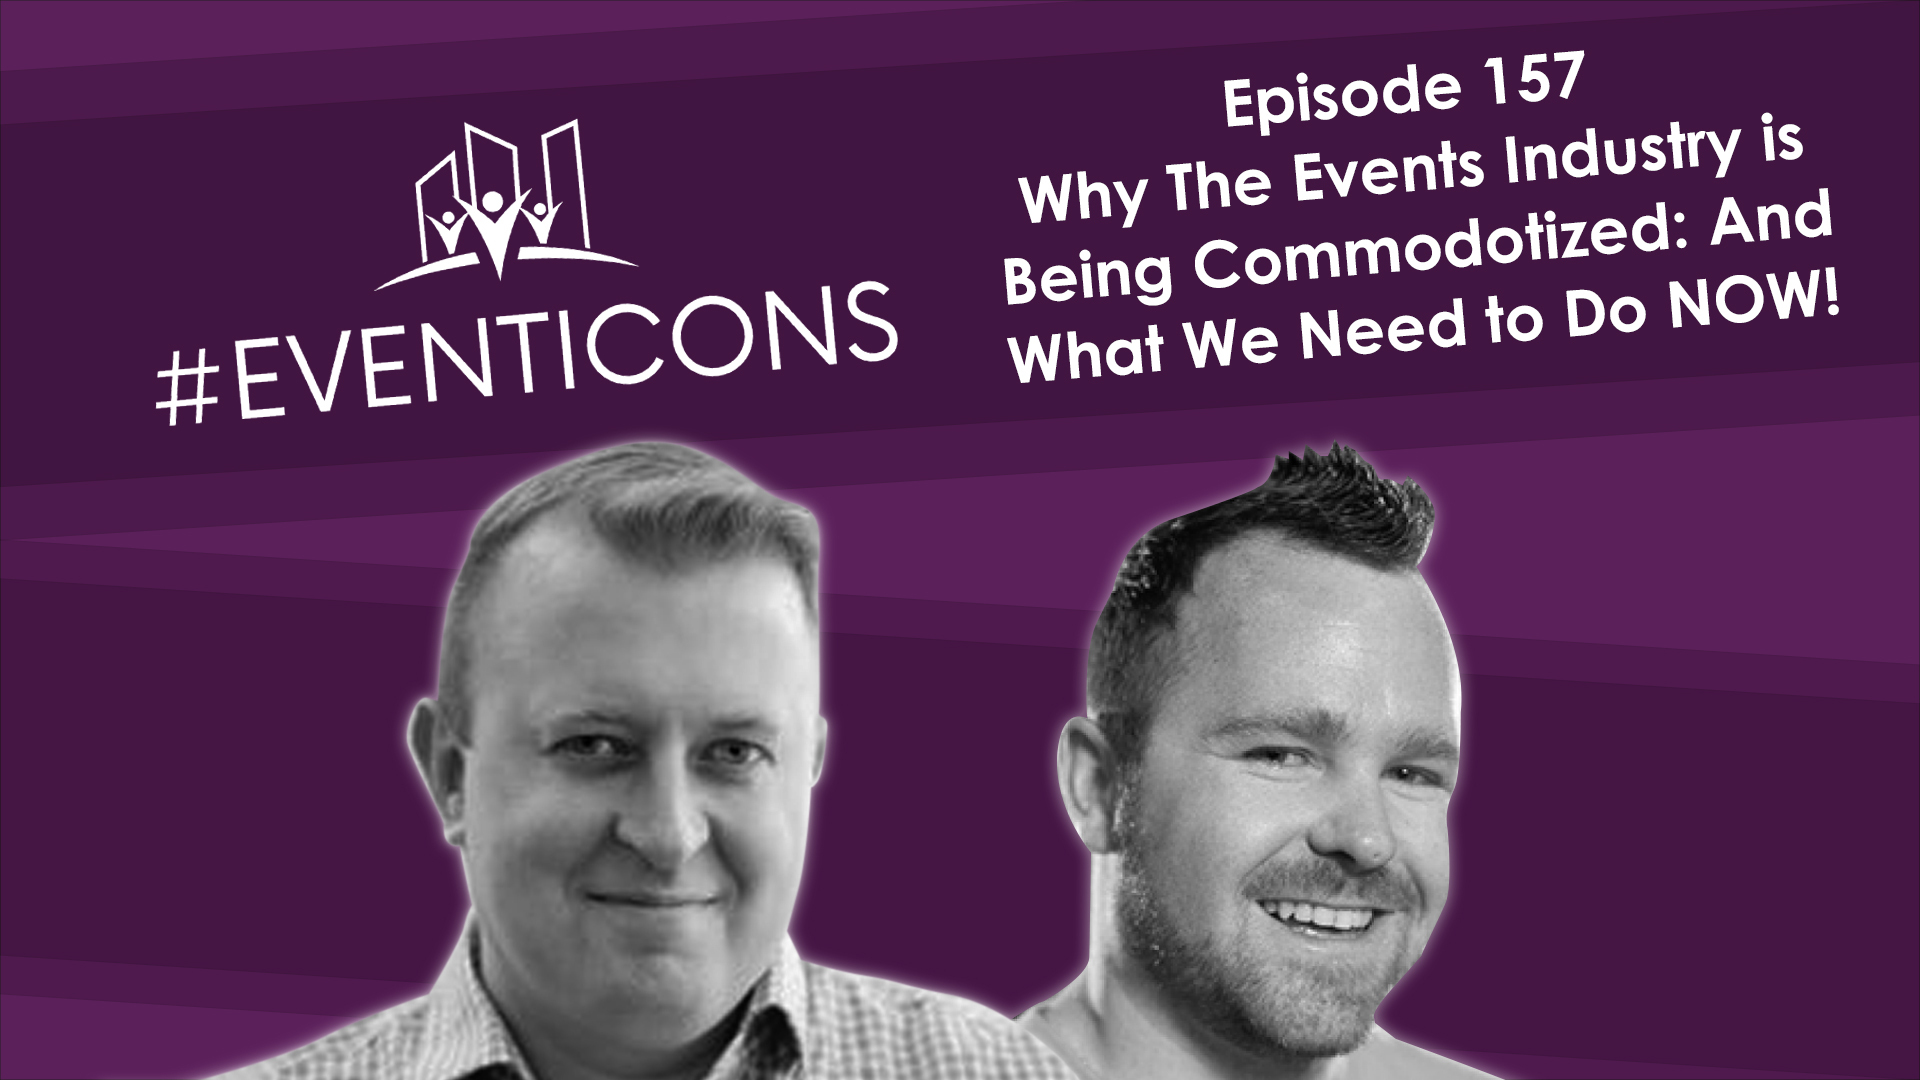 commoditization in the events industry